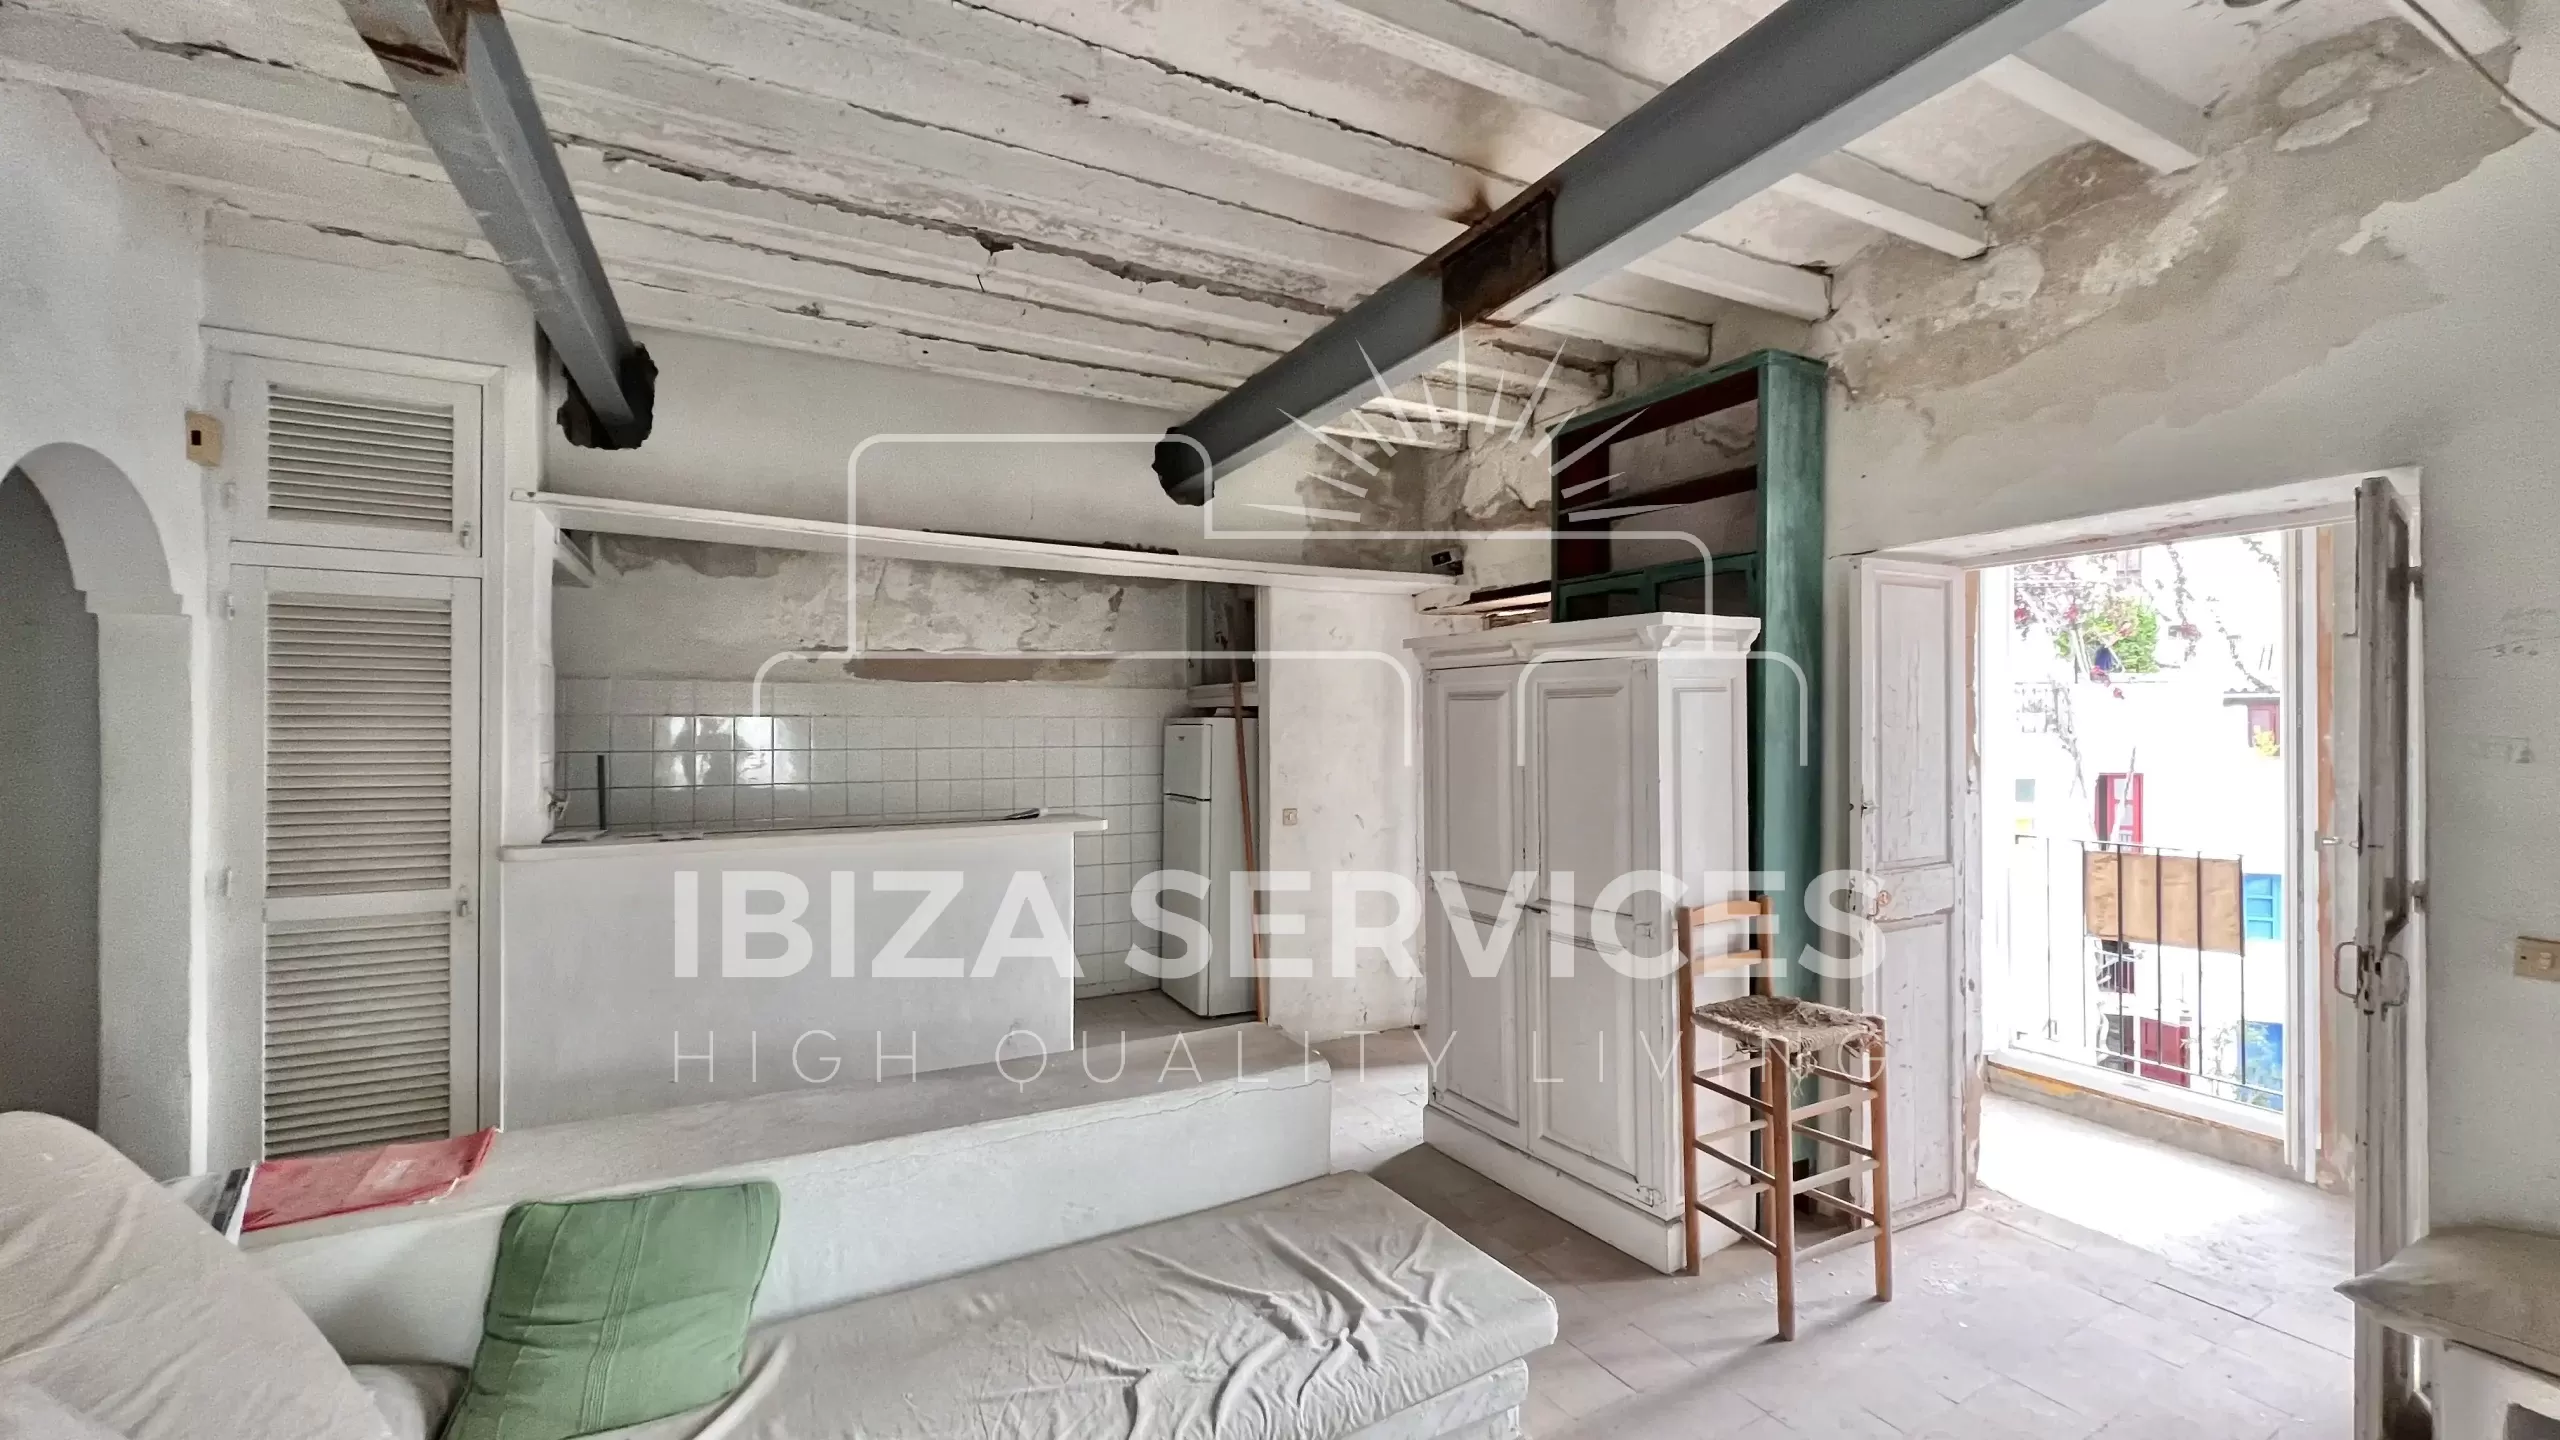 Flat to renovate in Dalt Villa with nice views for sale